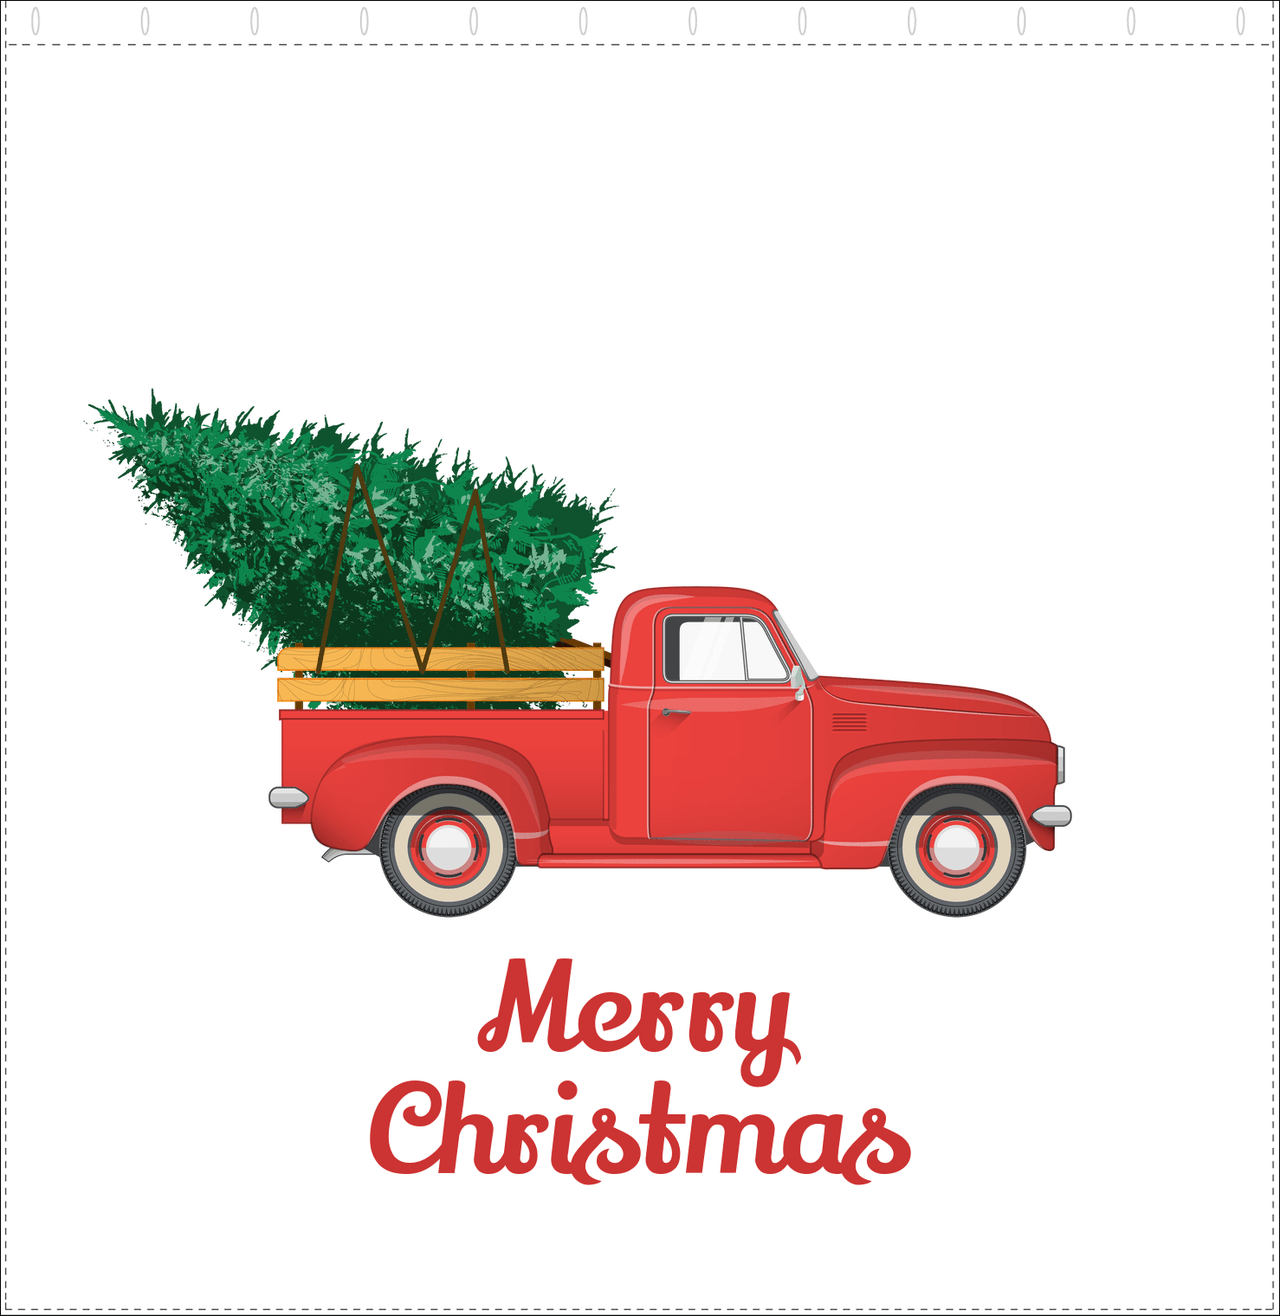 Personalized Christmas Shower Curtain - Old Red Truck with Christmas Tree - Decorate View